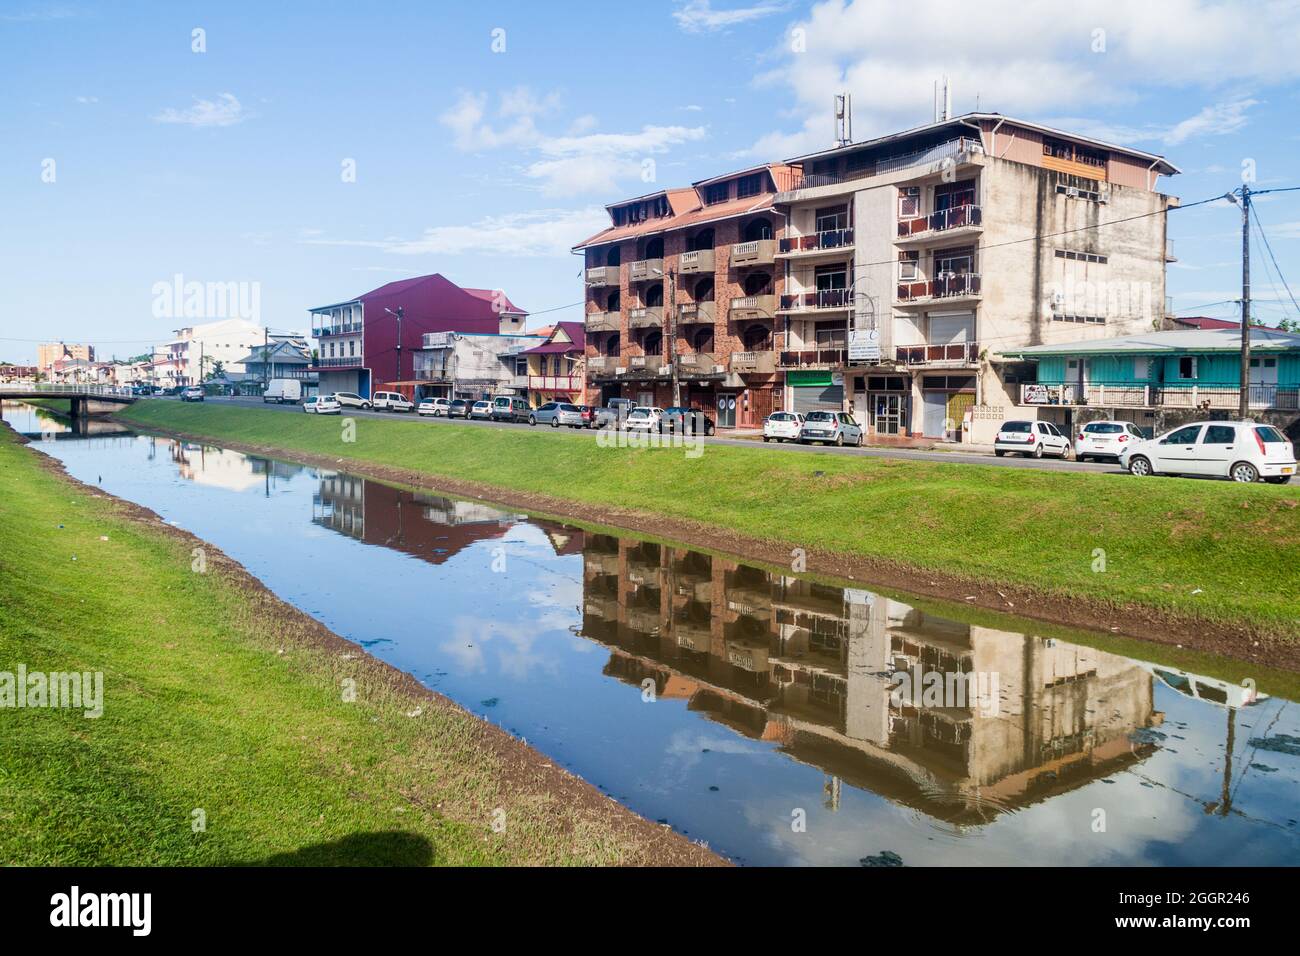 CAYENNE, FRENCH GUIANA - AUGUST 1, 2015: Canal Laussat in the center of Cayenne, capital of French Guiana. Stock Photo